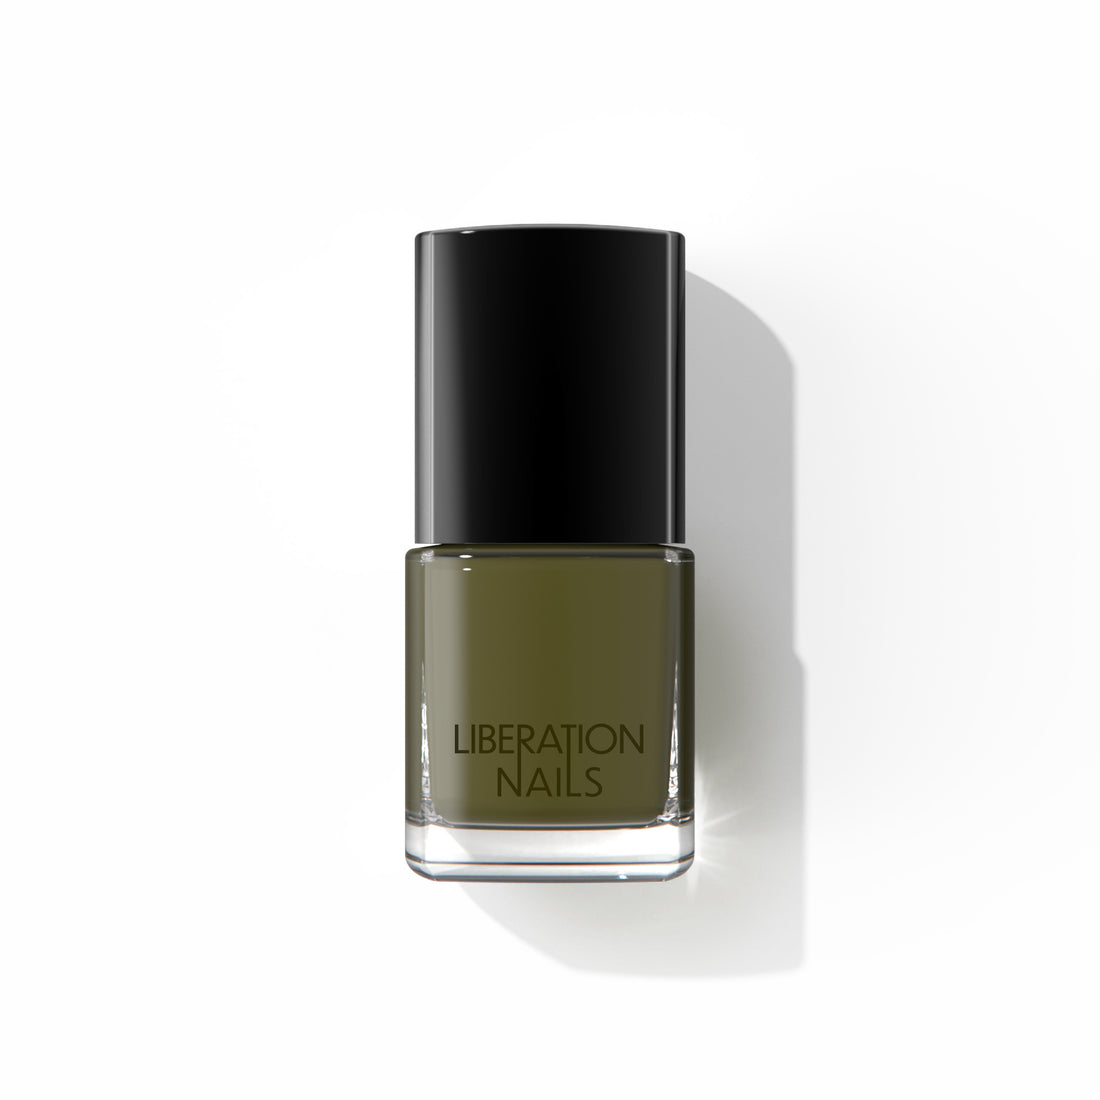 A bottle of Liberation Nails nail polish in a dark olive green color, Nature Bath.